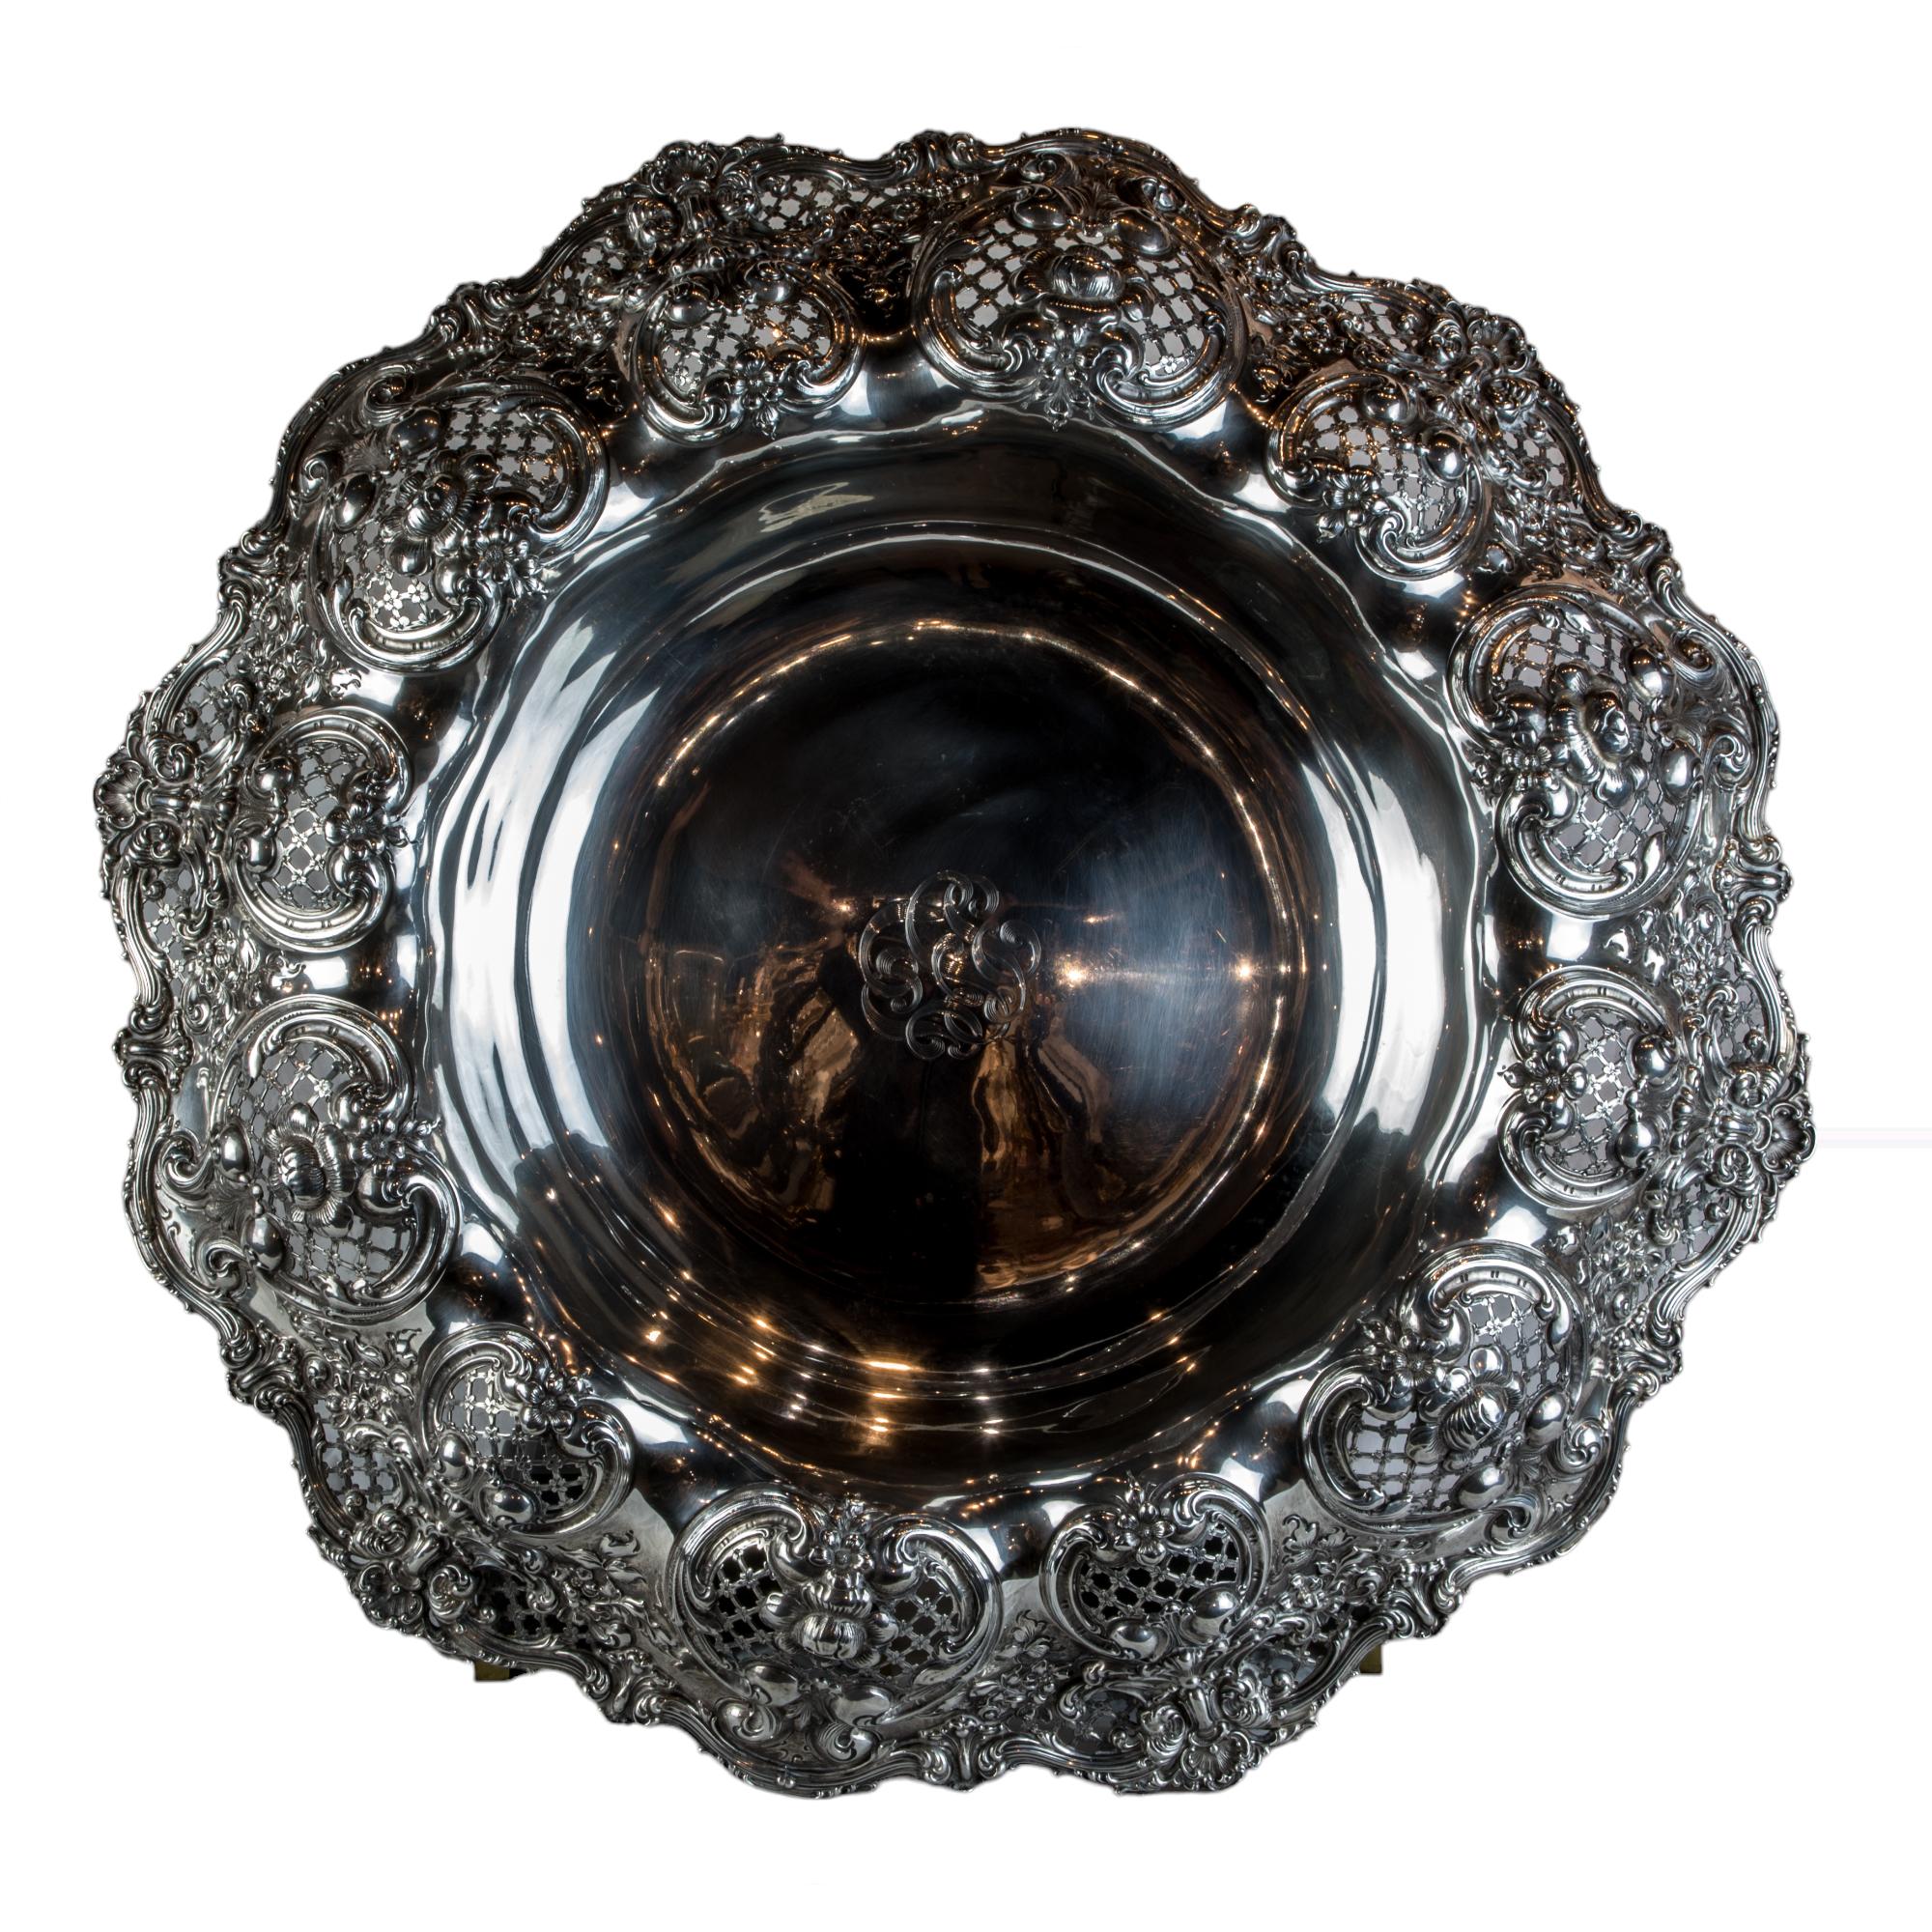 Majestic Ludwig, Redlich & Co. Sterling Silver Centerpiece Bowl, Circa 1890s In Good Condition For Sale In New York, NY